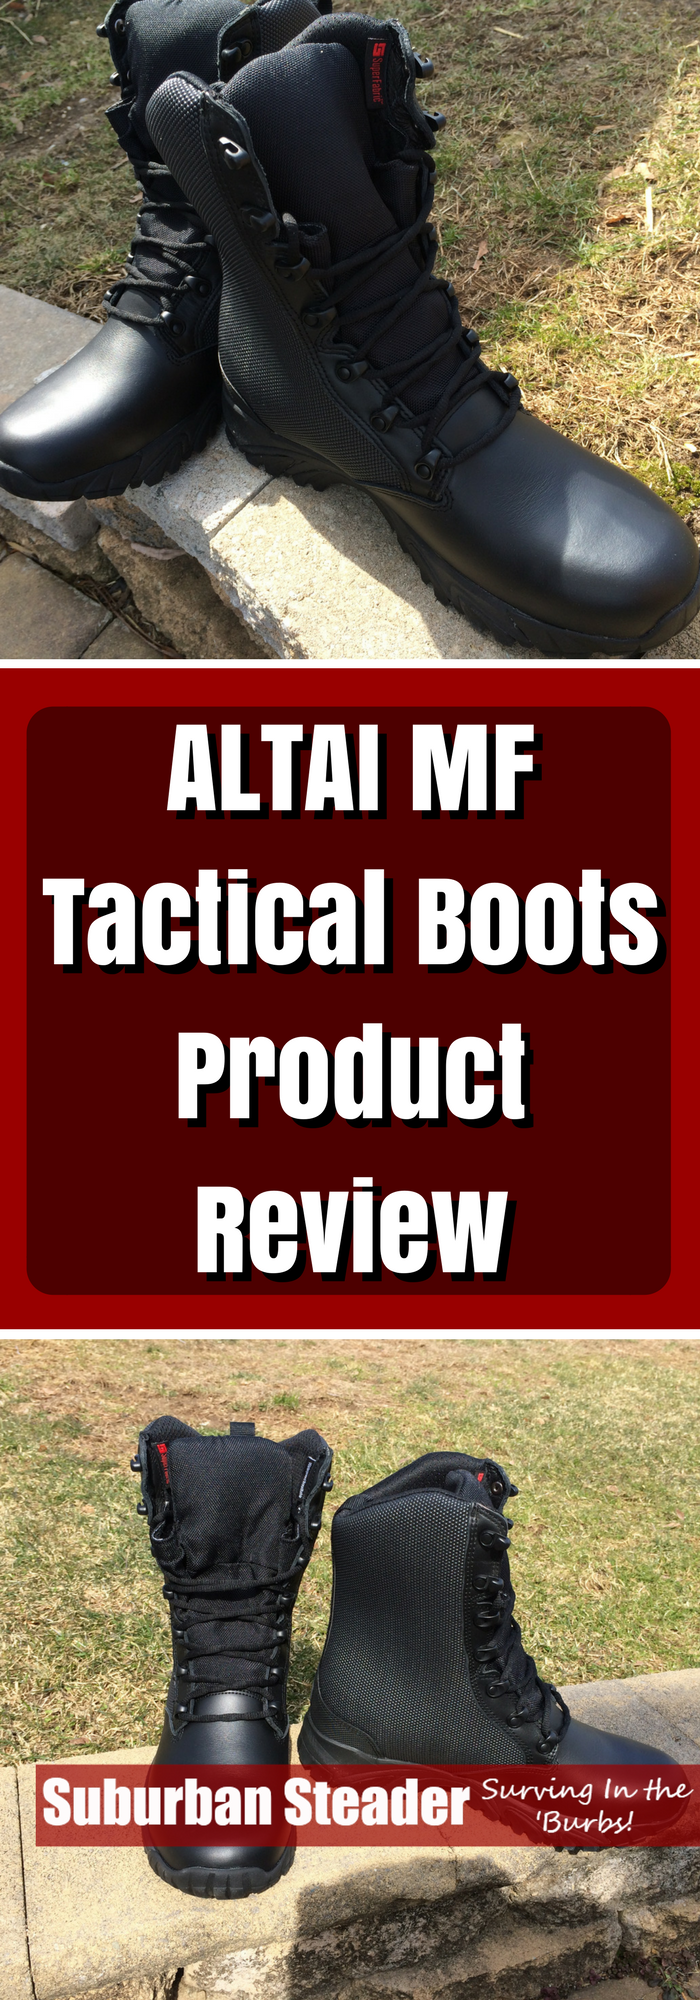 ALTAI MF Tactical Boots